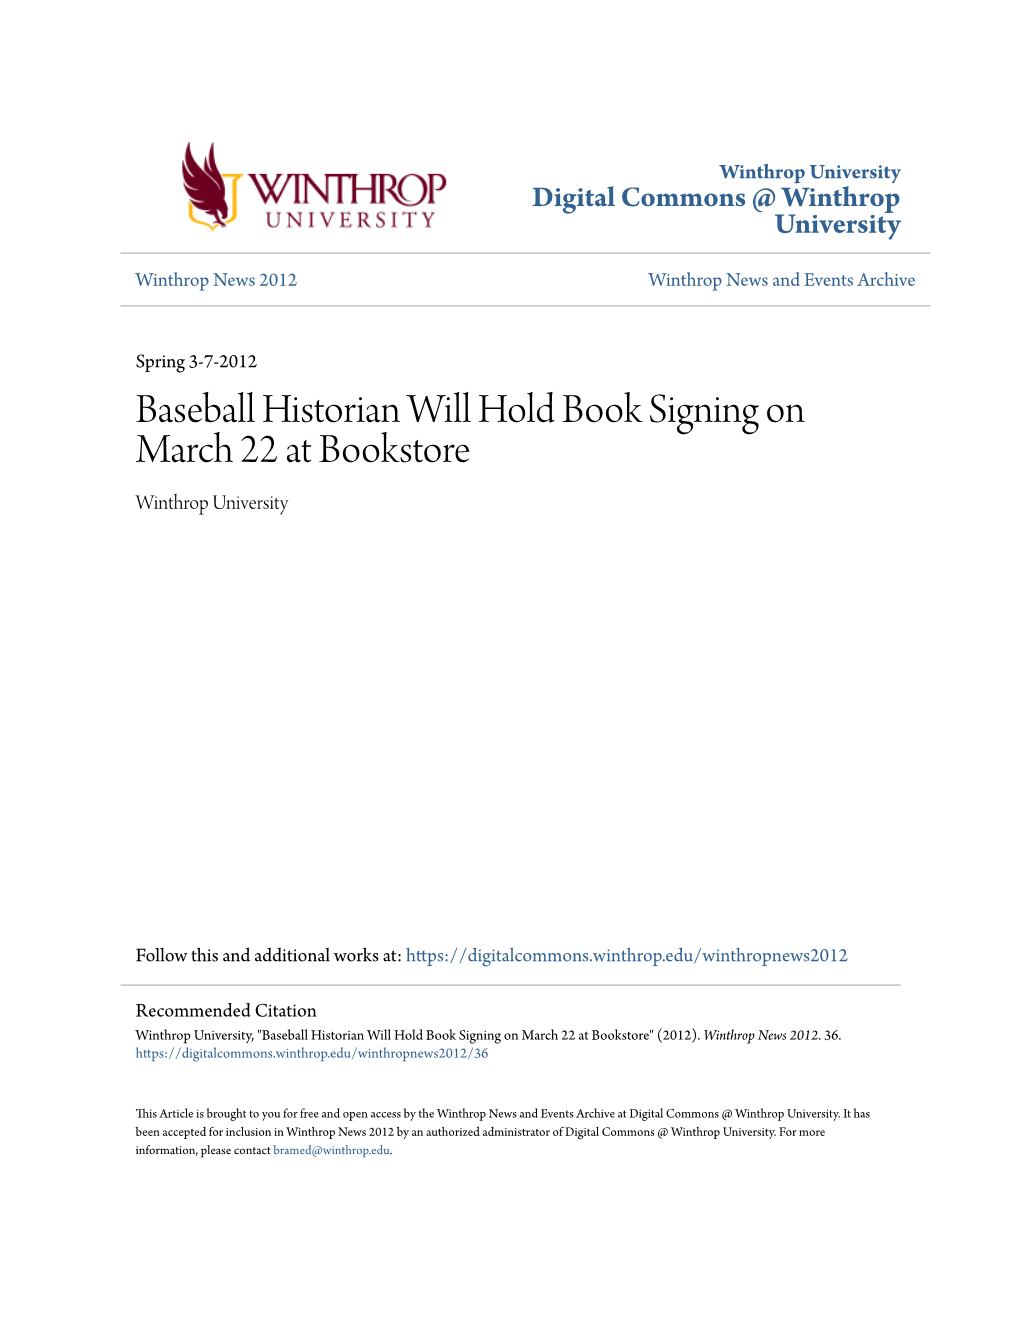 Baseball Historian Will Hold Book Signing on March 22 at Bookstore Winthrop University